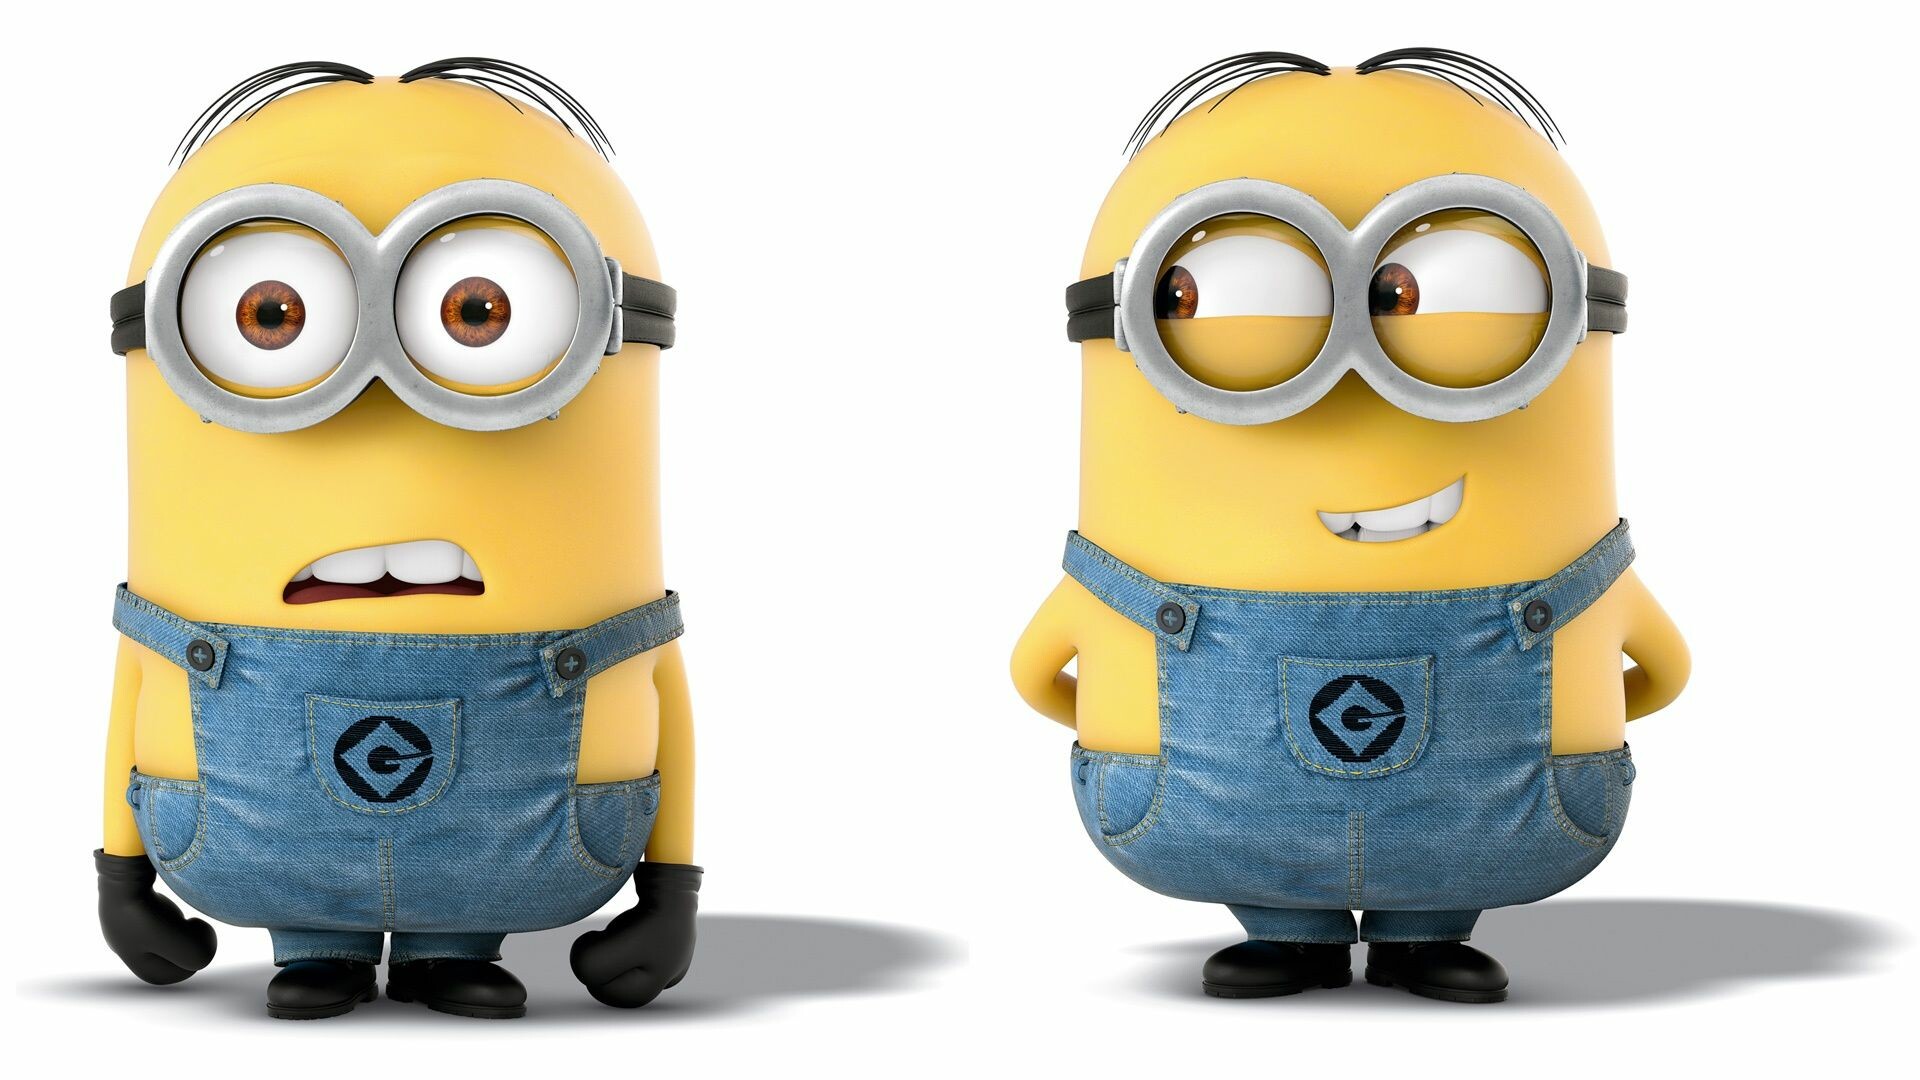 Despicable Me: 2013 movie, earned $970.8 million worldwide, Minions. 1920x1080 Full HD Wallpaper.